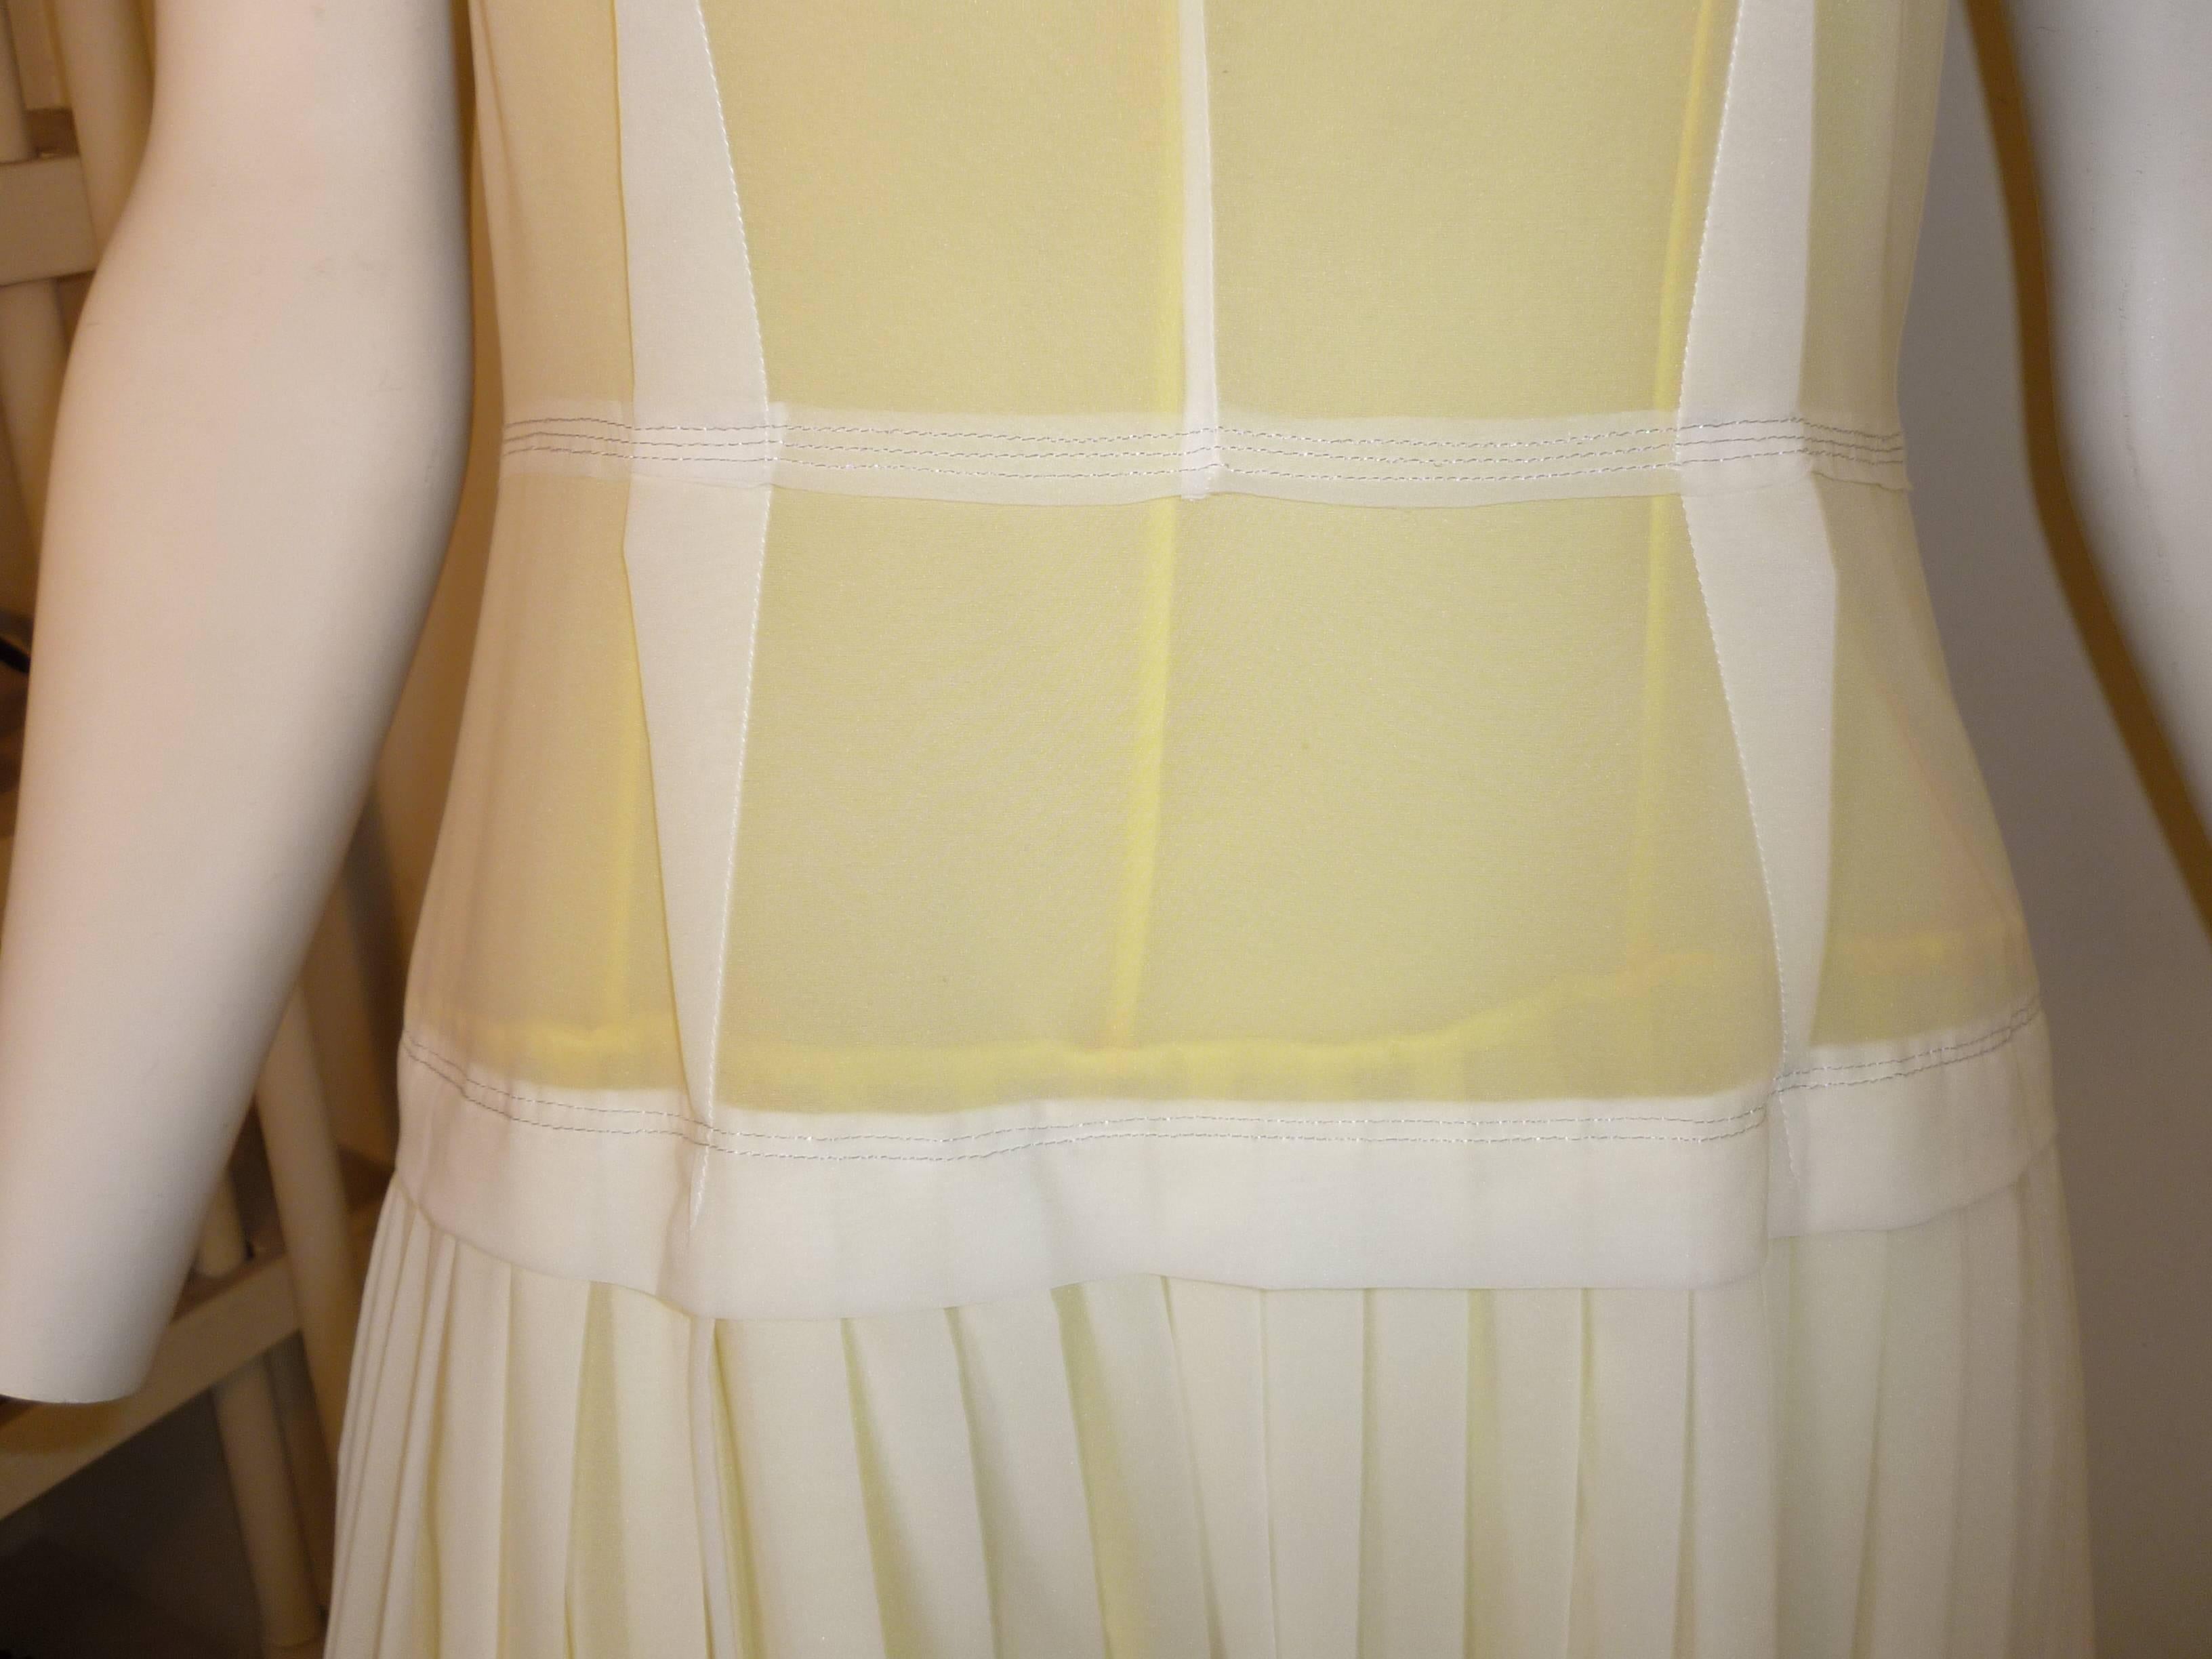 Delicate dropped waist dress made of 81% nylon and 19% elastane, it has two lining one beige and the other yellow.

There are several darts on the top half of the dress; a band at the waist and the skirt is soft pleated.